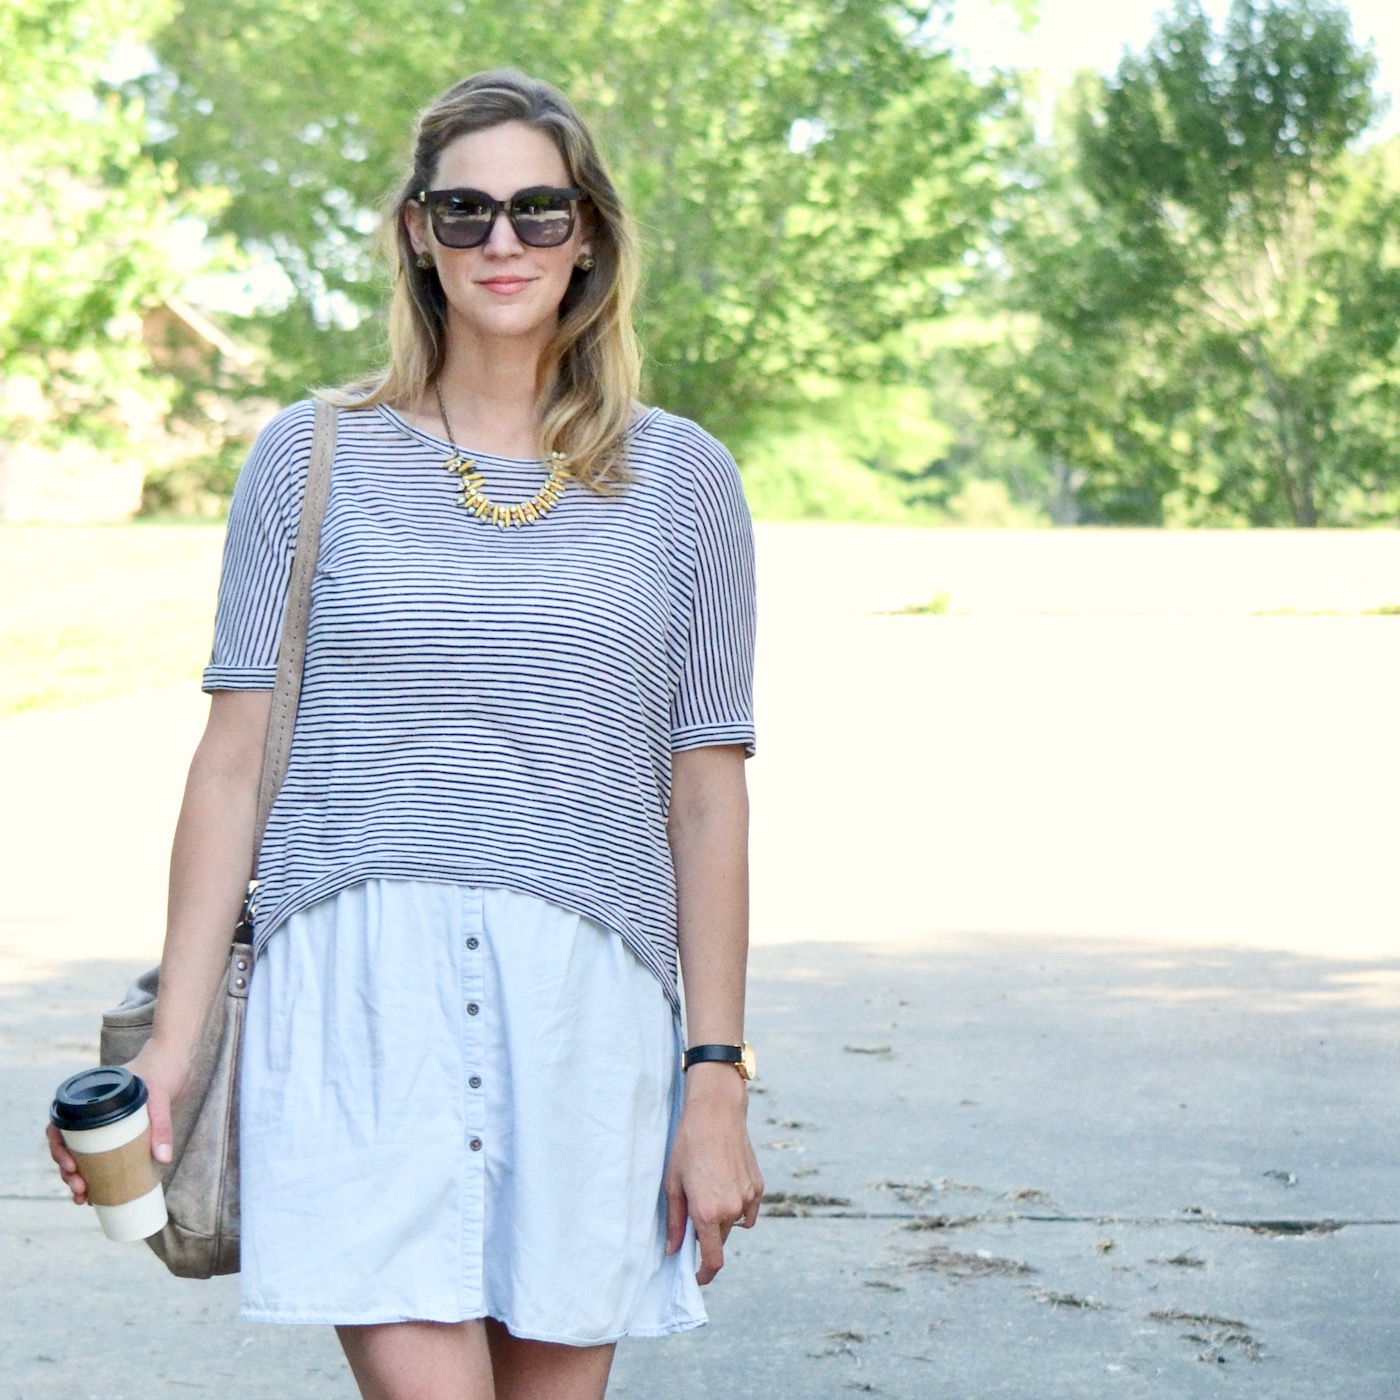 Layering while pregnant: How to dress in the first trimester // www.thehiveblog.com